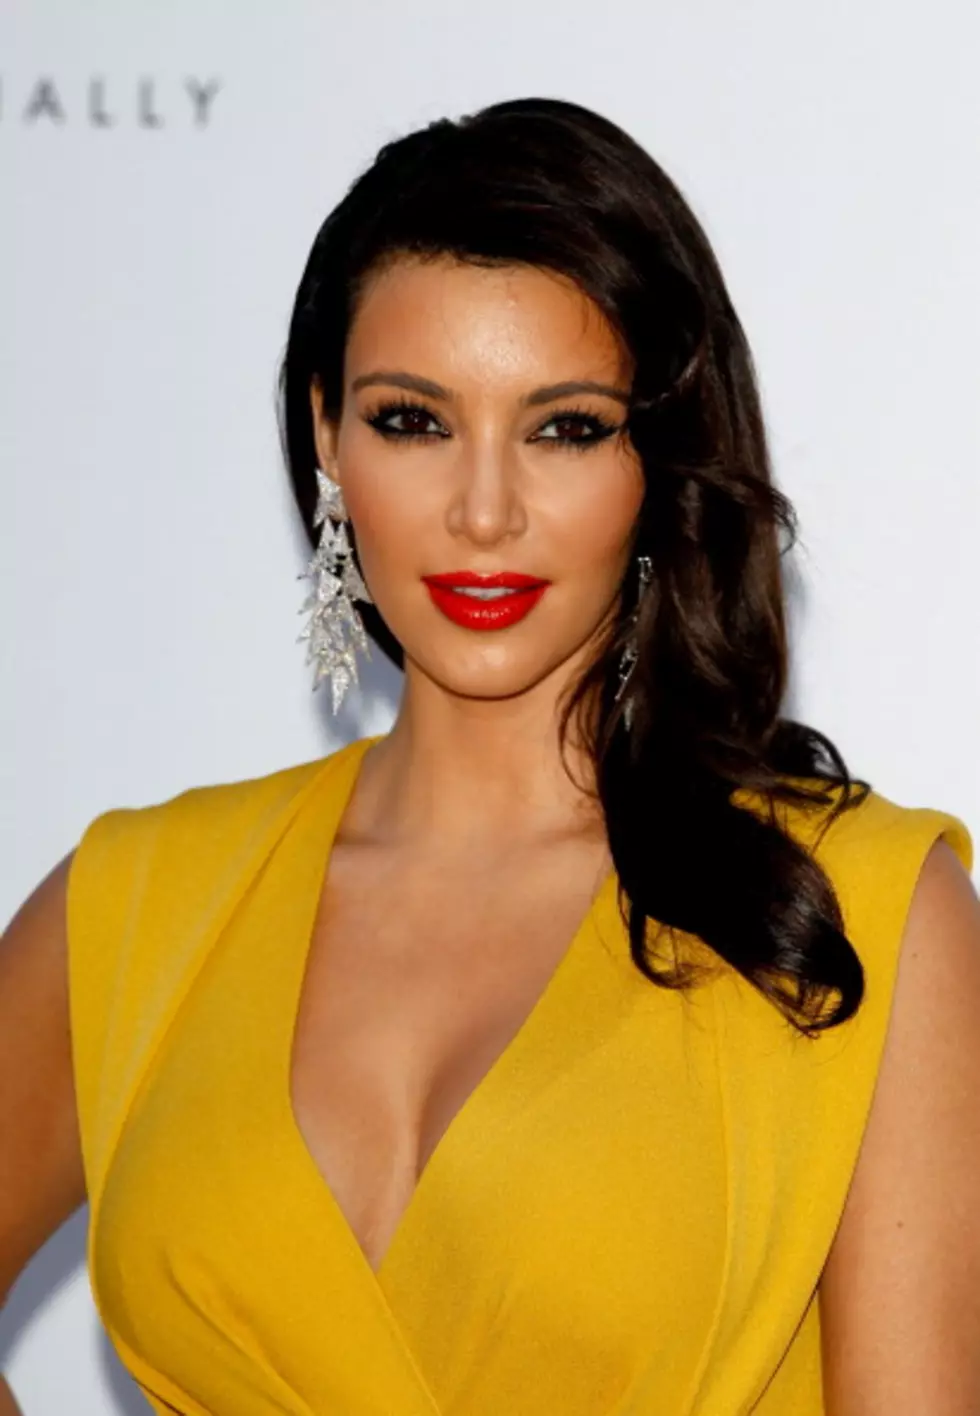 Kim Kardashian is the Second Most Hated Person in America – Who’s #1?